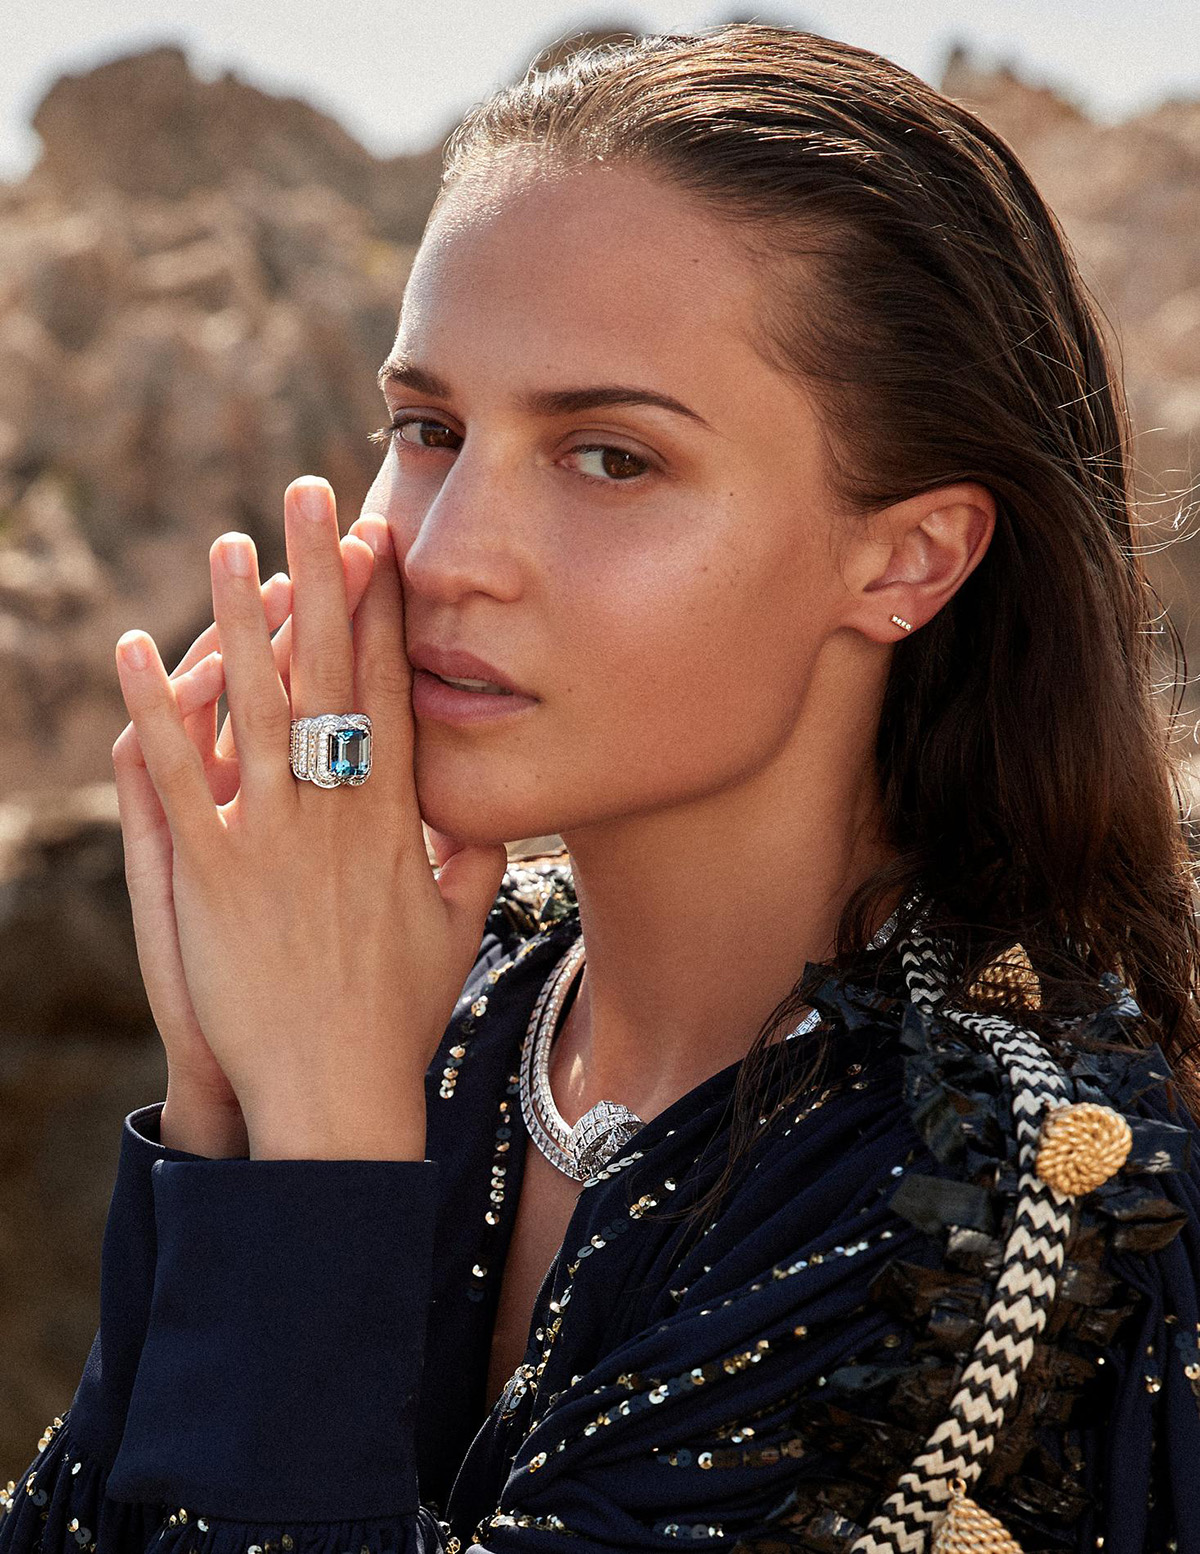 Alicia Vikander in Louis Vuitton on Madame Figaro December 31st, 2021 by David Roemer